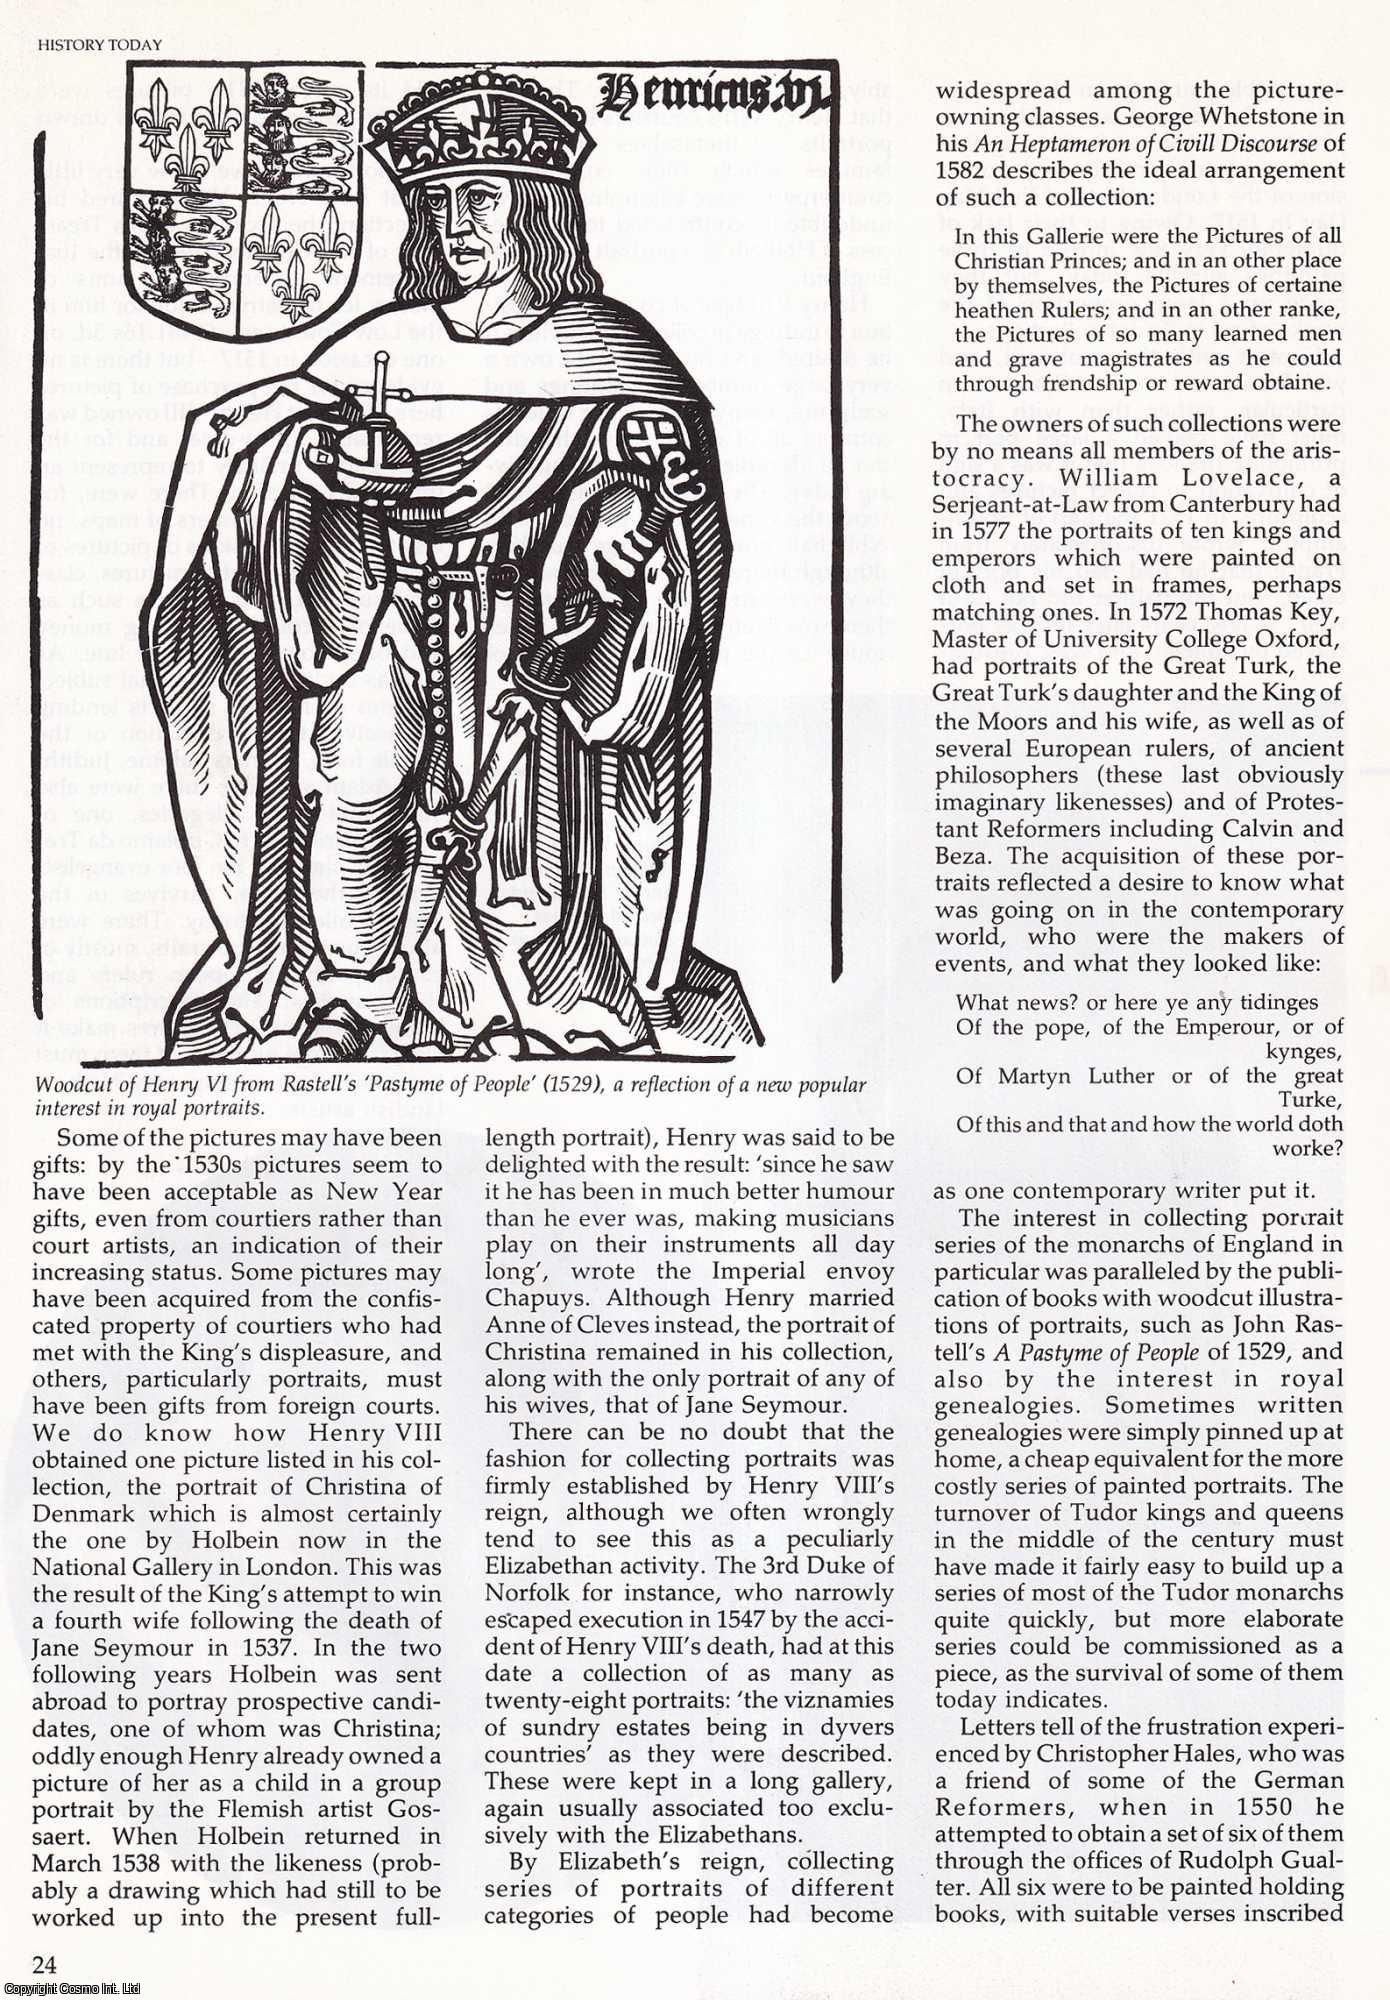 Susan Foister - Tudor Collections and Collectors. An original article from History Today, 1985.